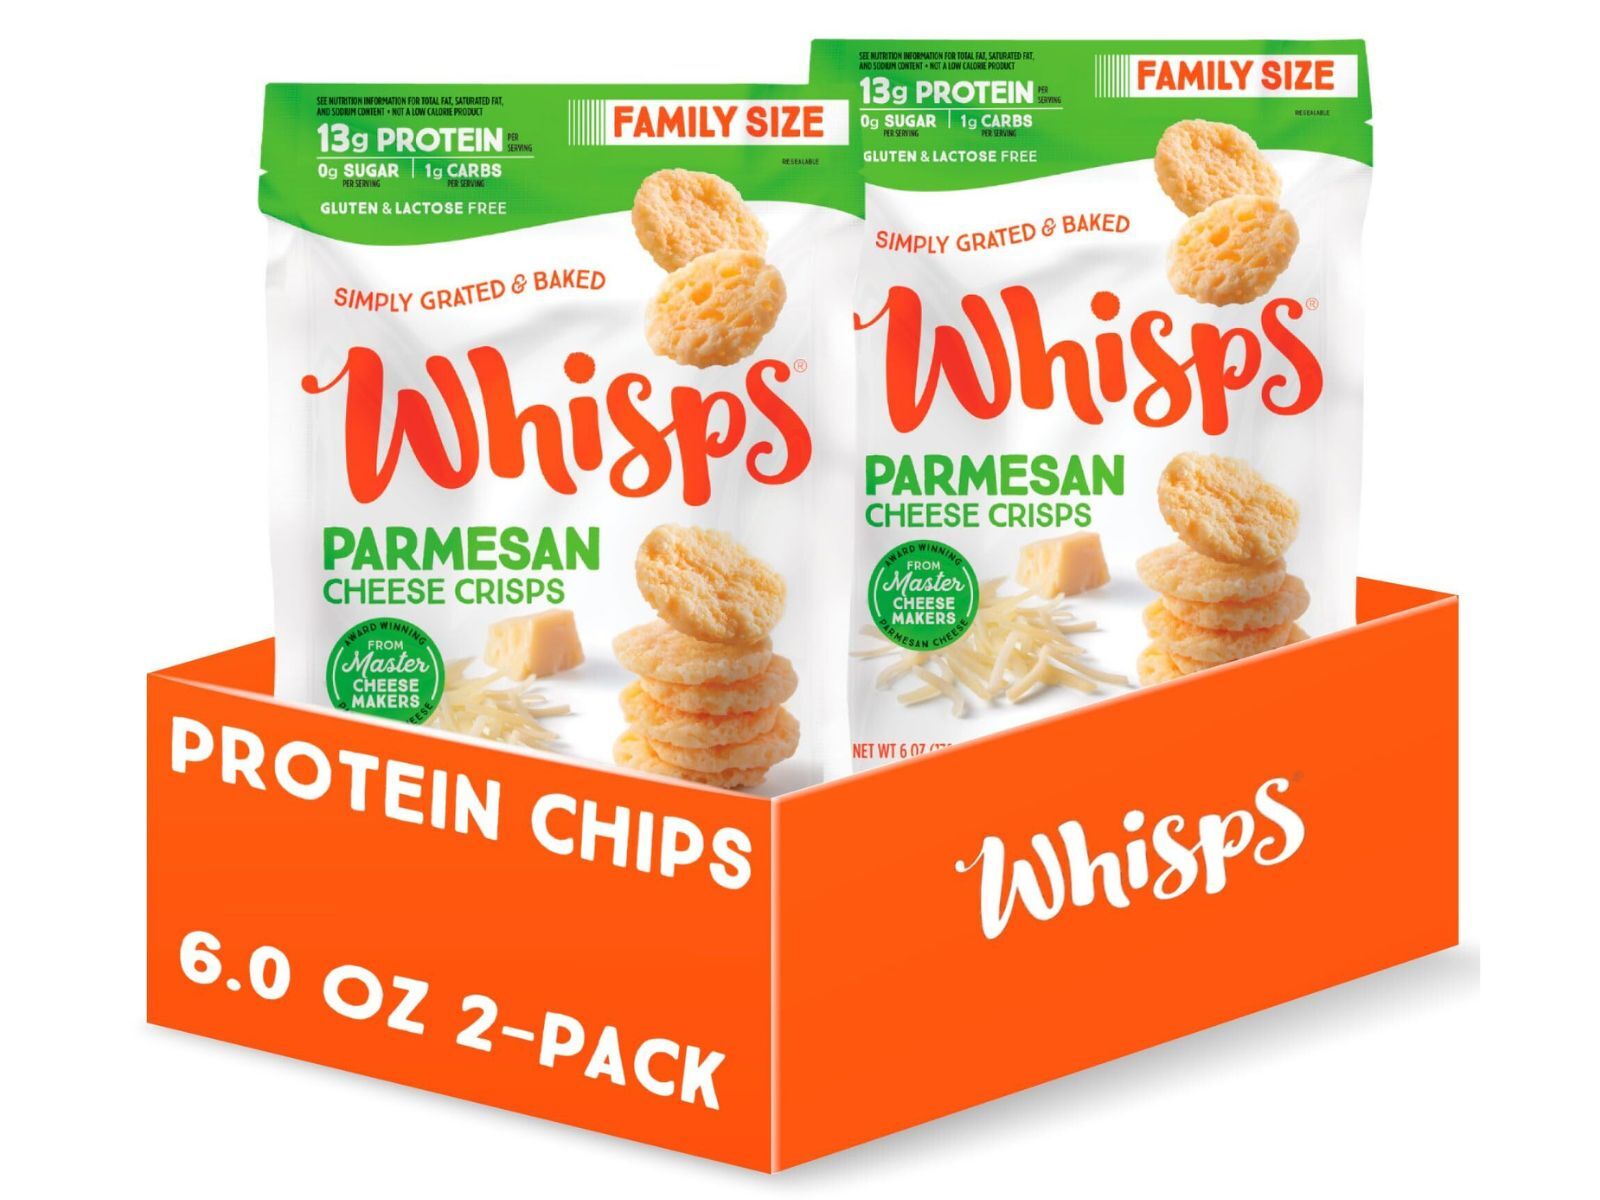 High-protein snacks: Whisps protein chips